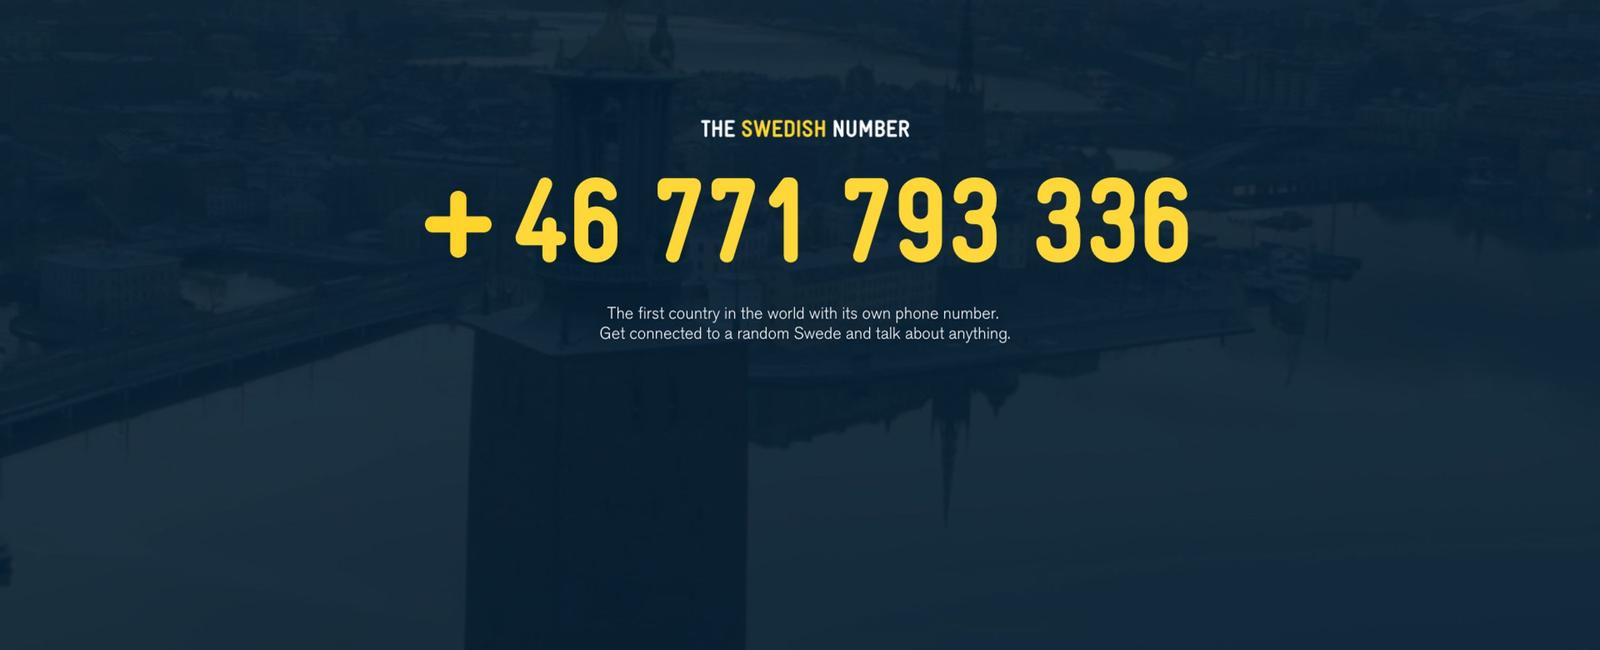 90 000 was the phone number to the swedish emergency service that started in 1953 and was operational until july 1 1996